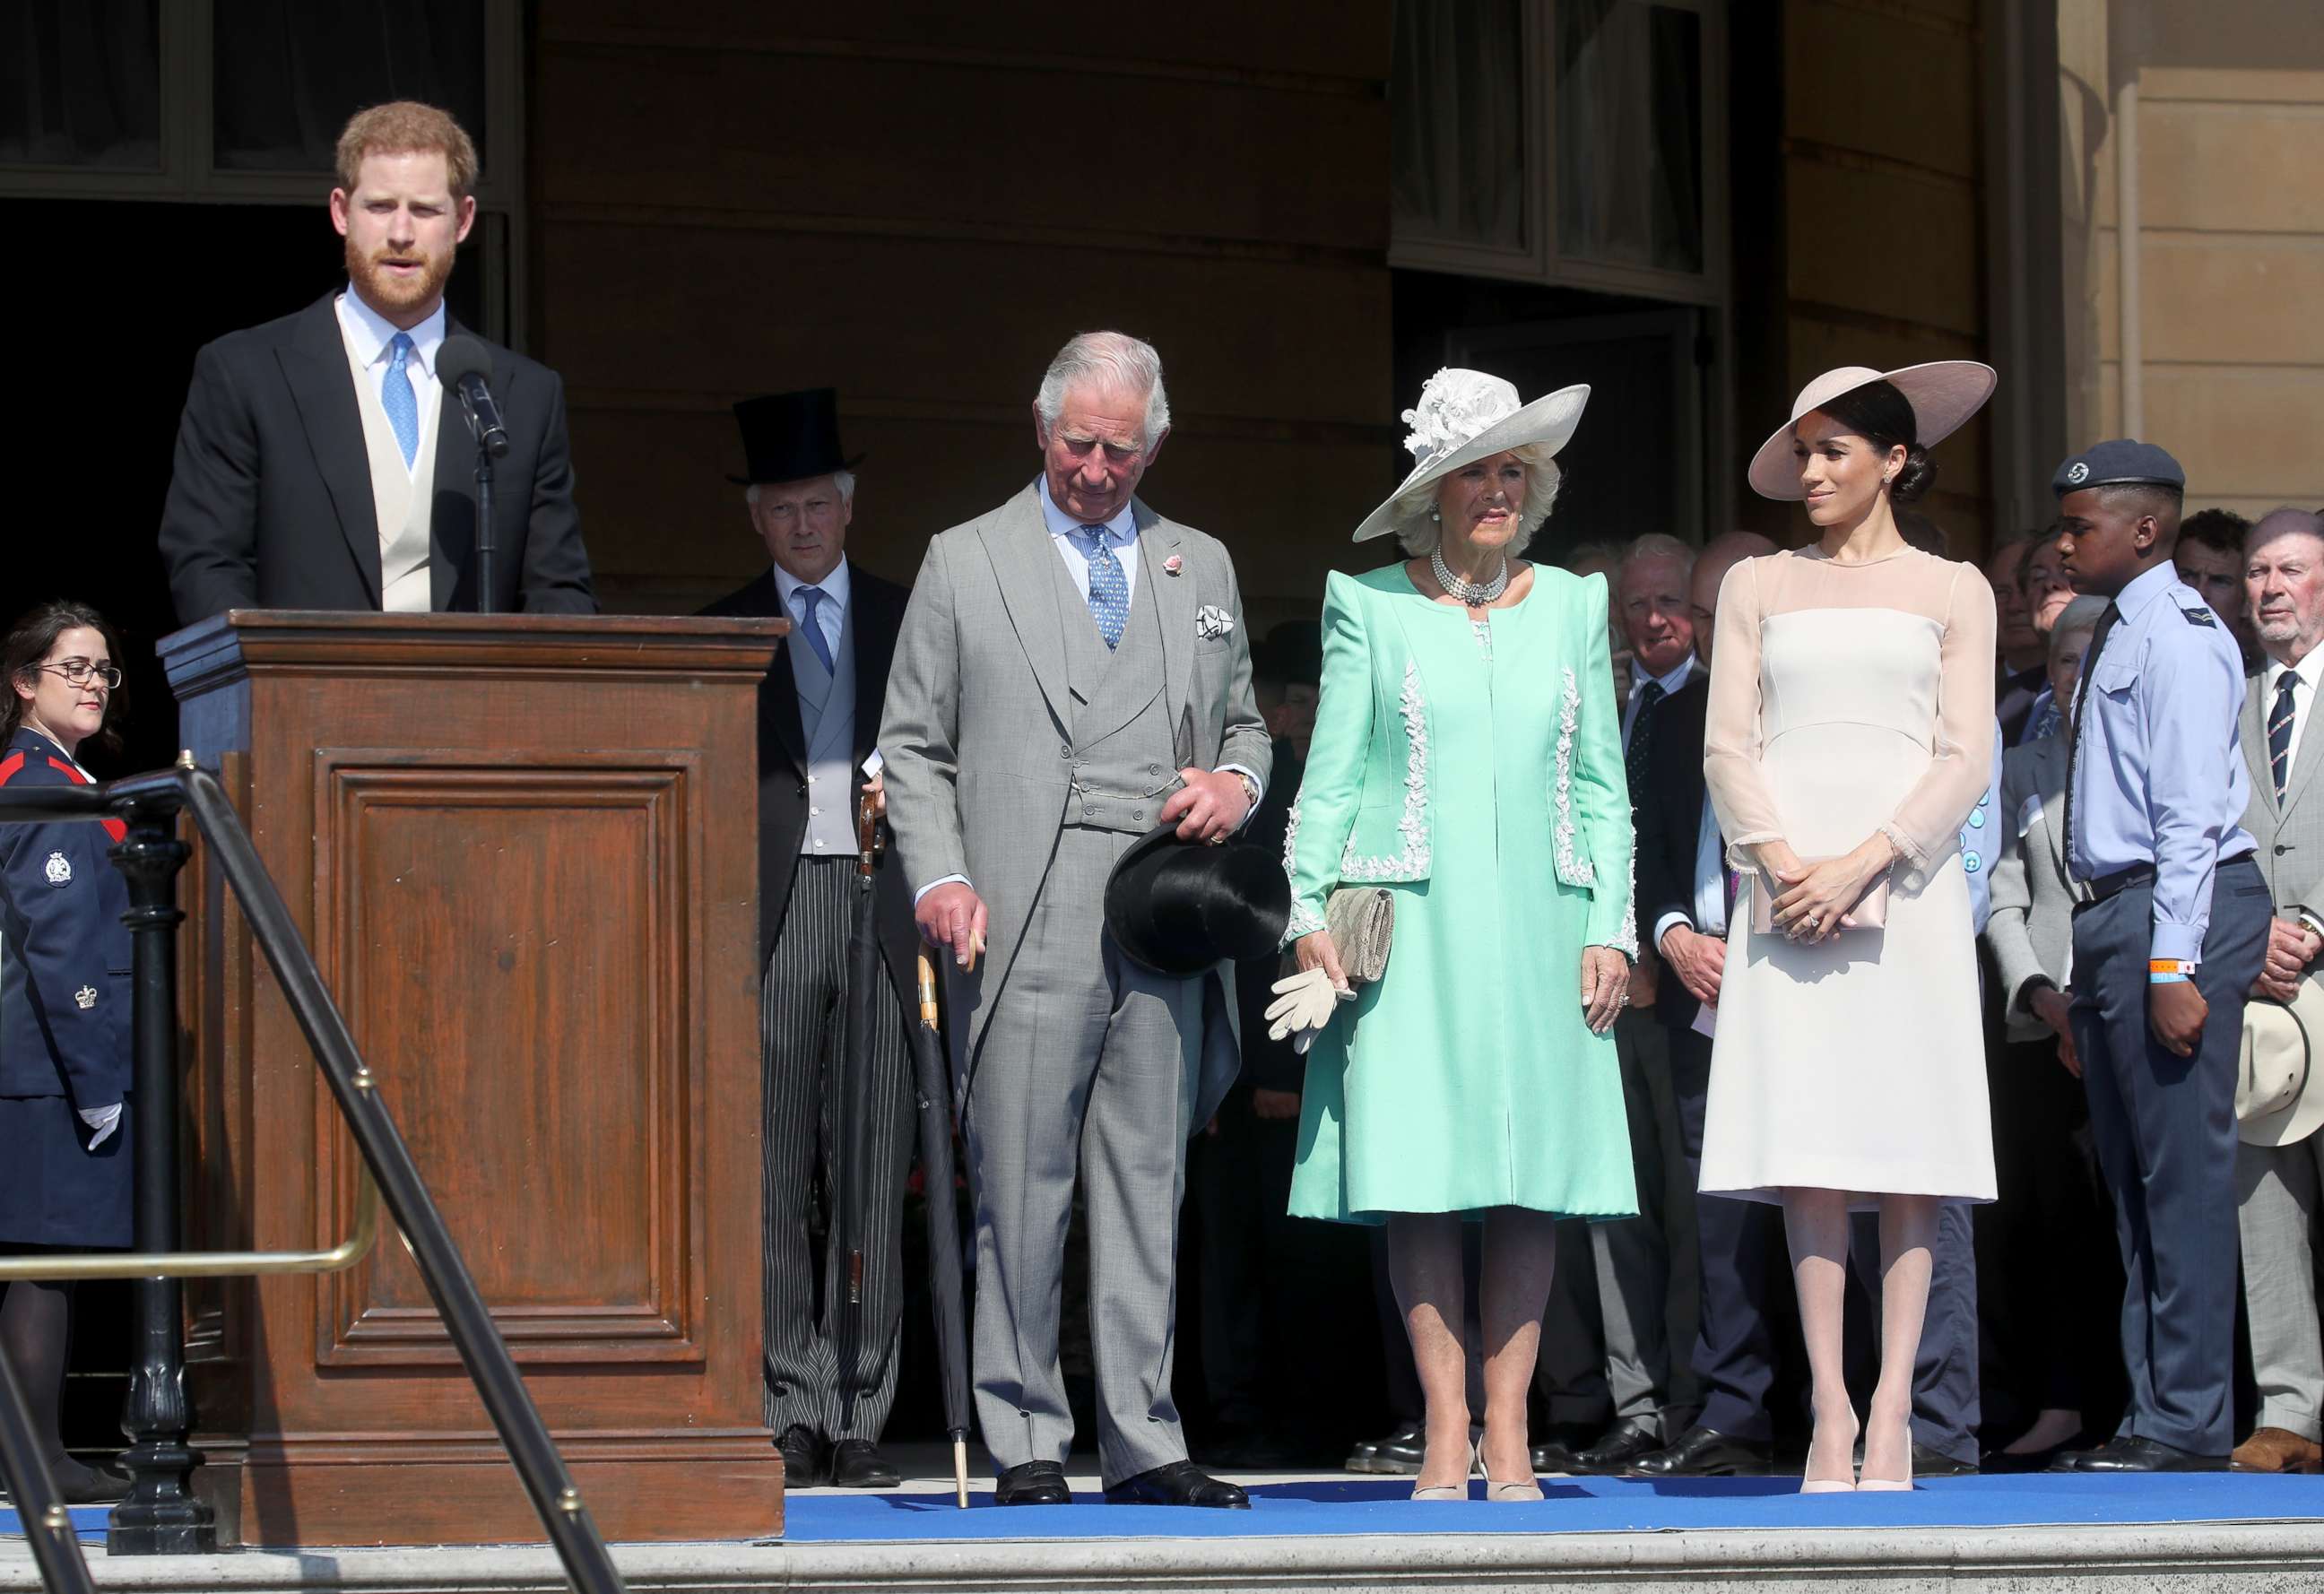 PHOTO: Prince Harry, Duke of Sussex gives a speech next to Prince Charles, Prince of Wales, Camilla, Duchess of Cornwall and Meghan, Duchess of Sussex as they attend The Prince of Wales' 70th Birthday Patronage Celebration, May 22, 2018, in London.